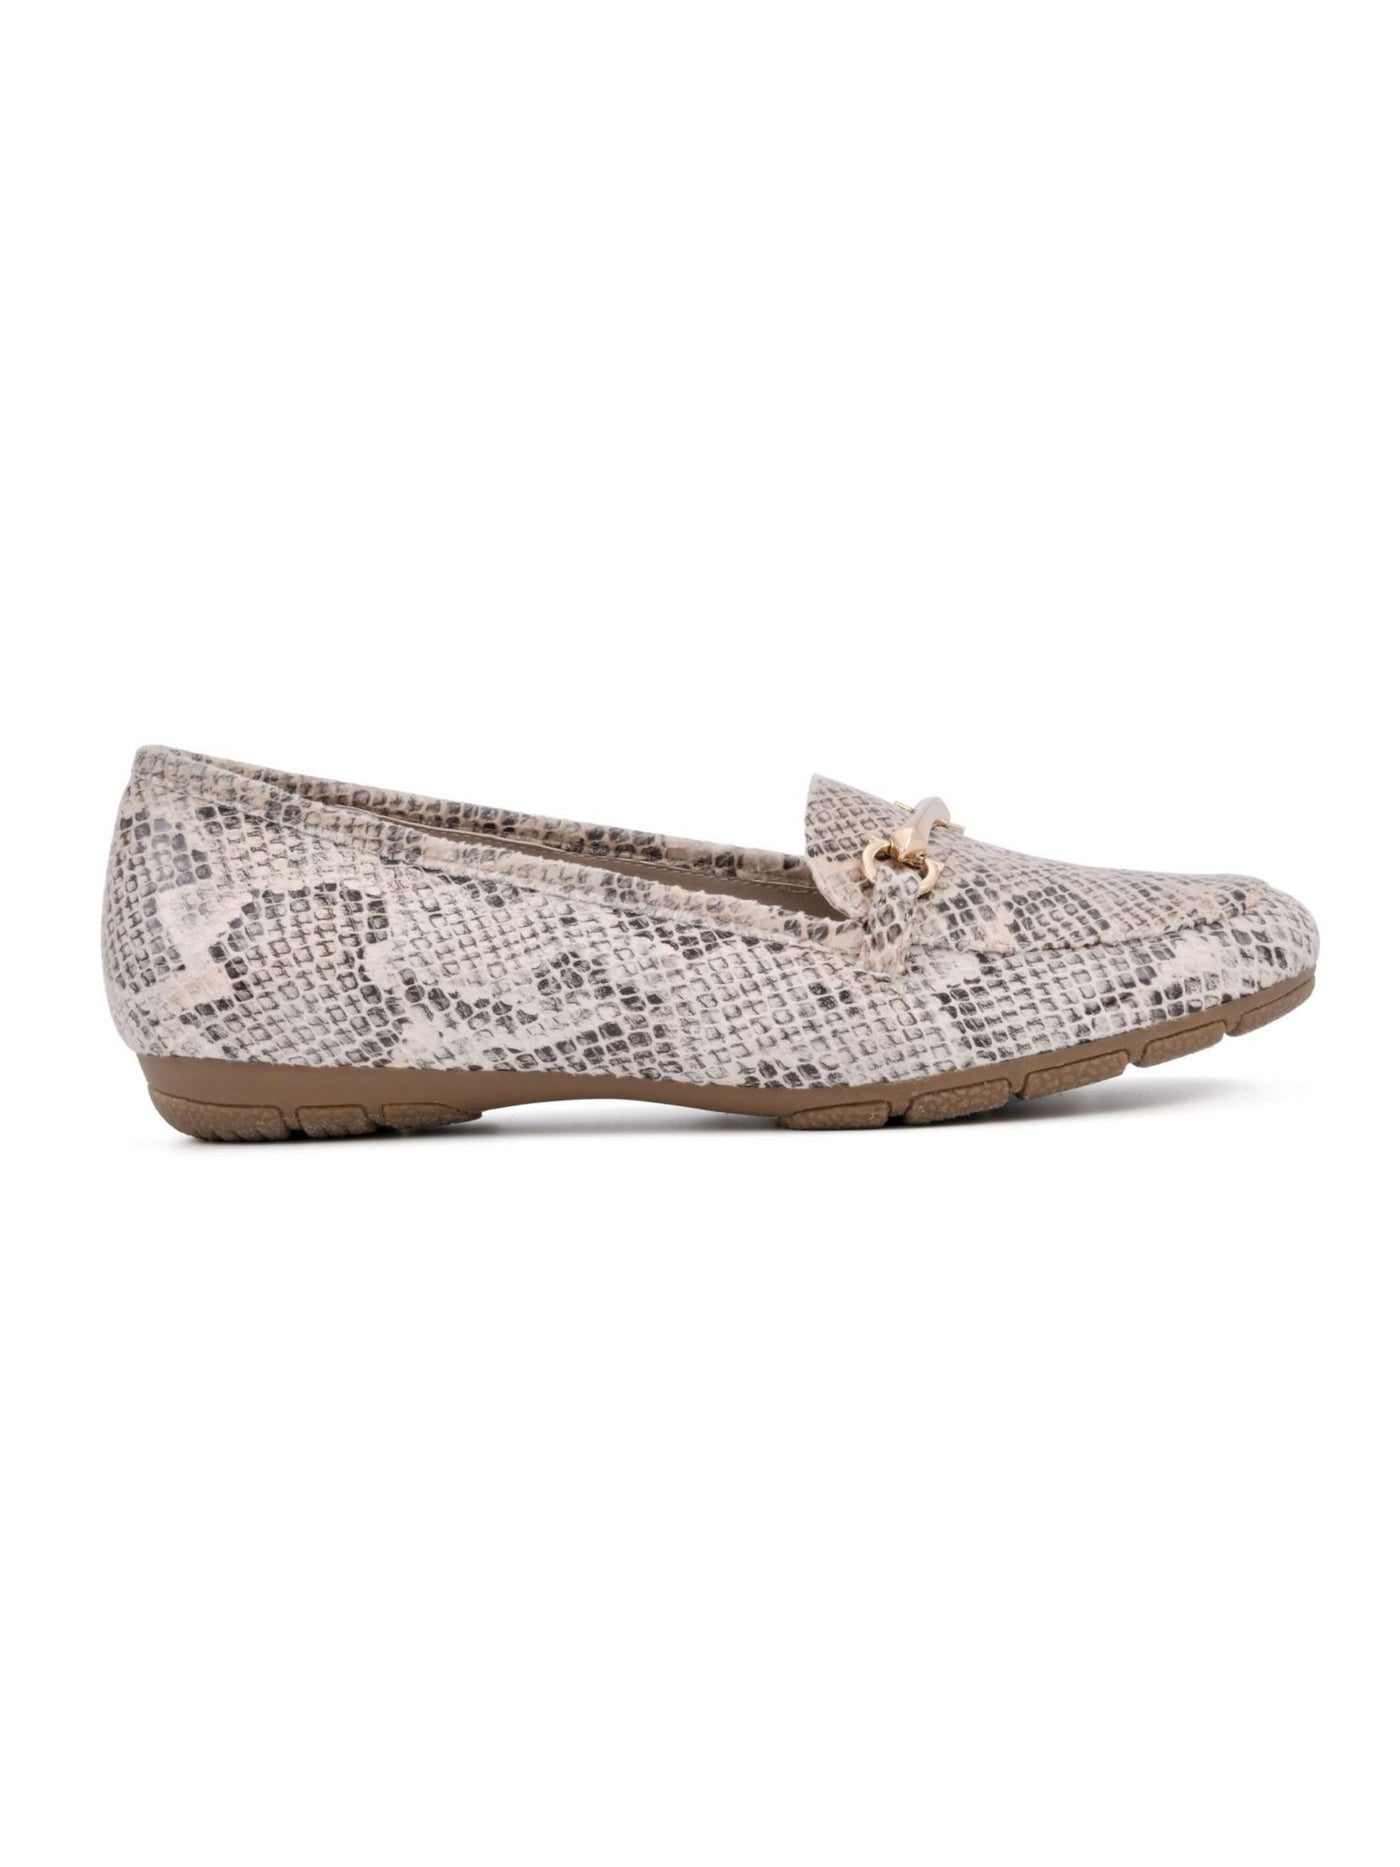 RIALTO Womens Beige Snake Print Metallic Bit Comfort Padded Treaded Guiding Round Toe Slip On Loafers Shoes 7 W